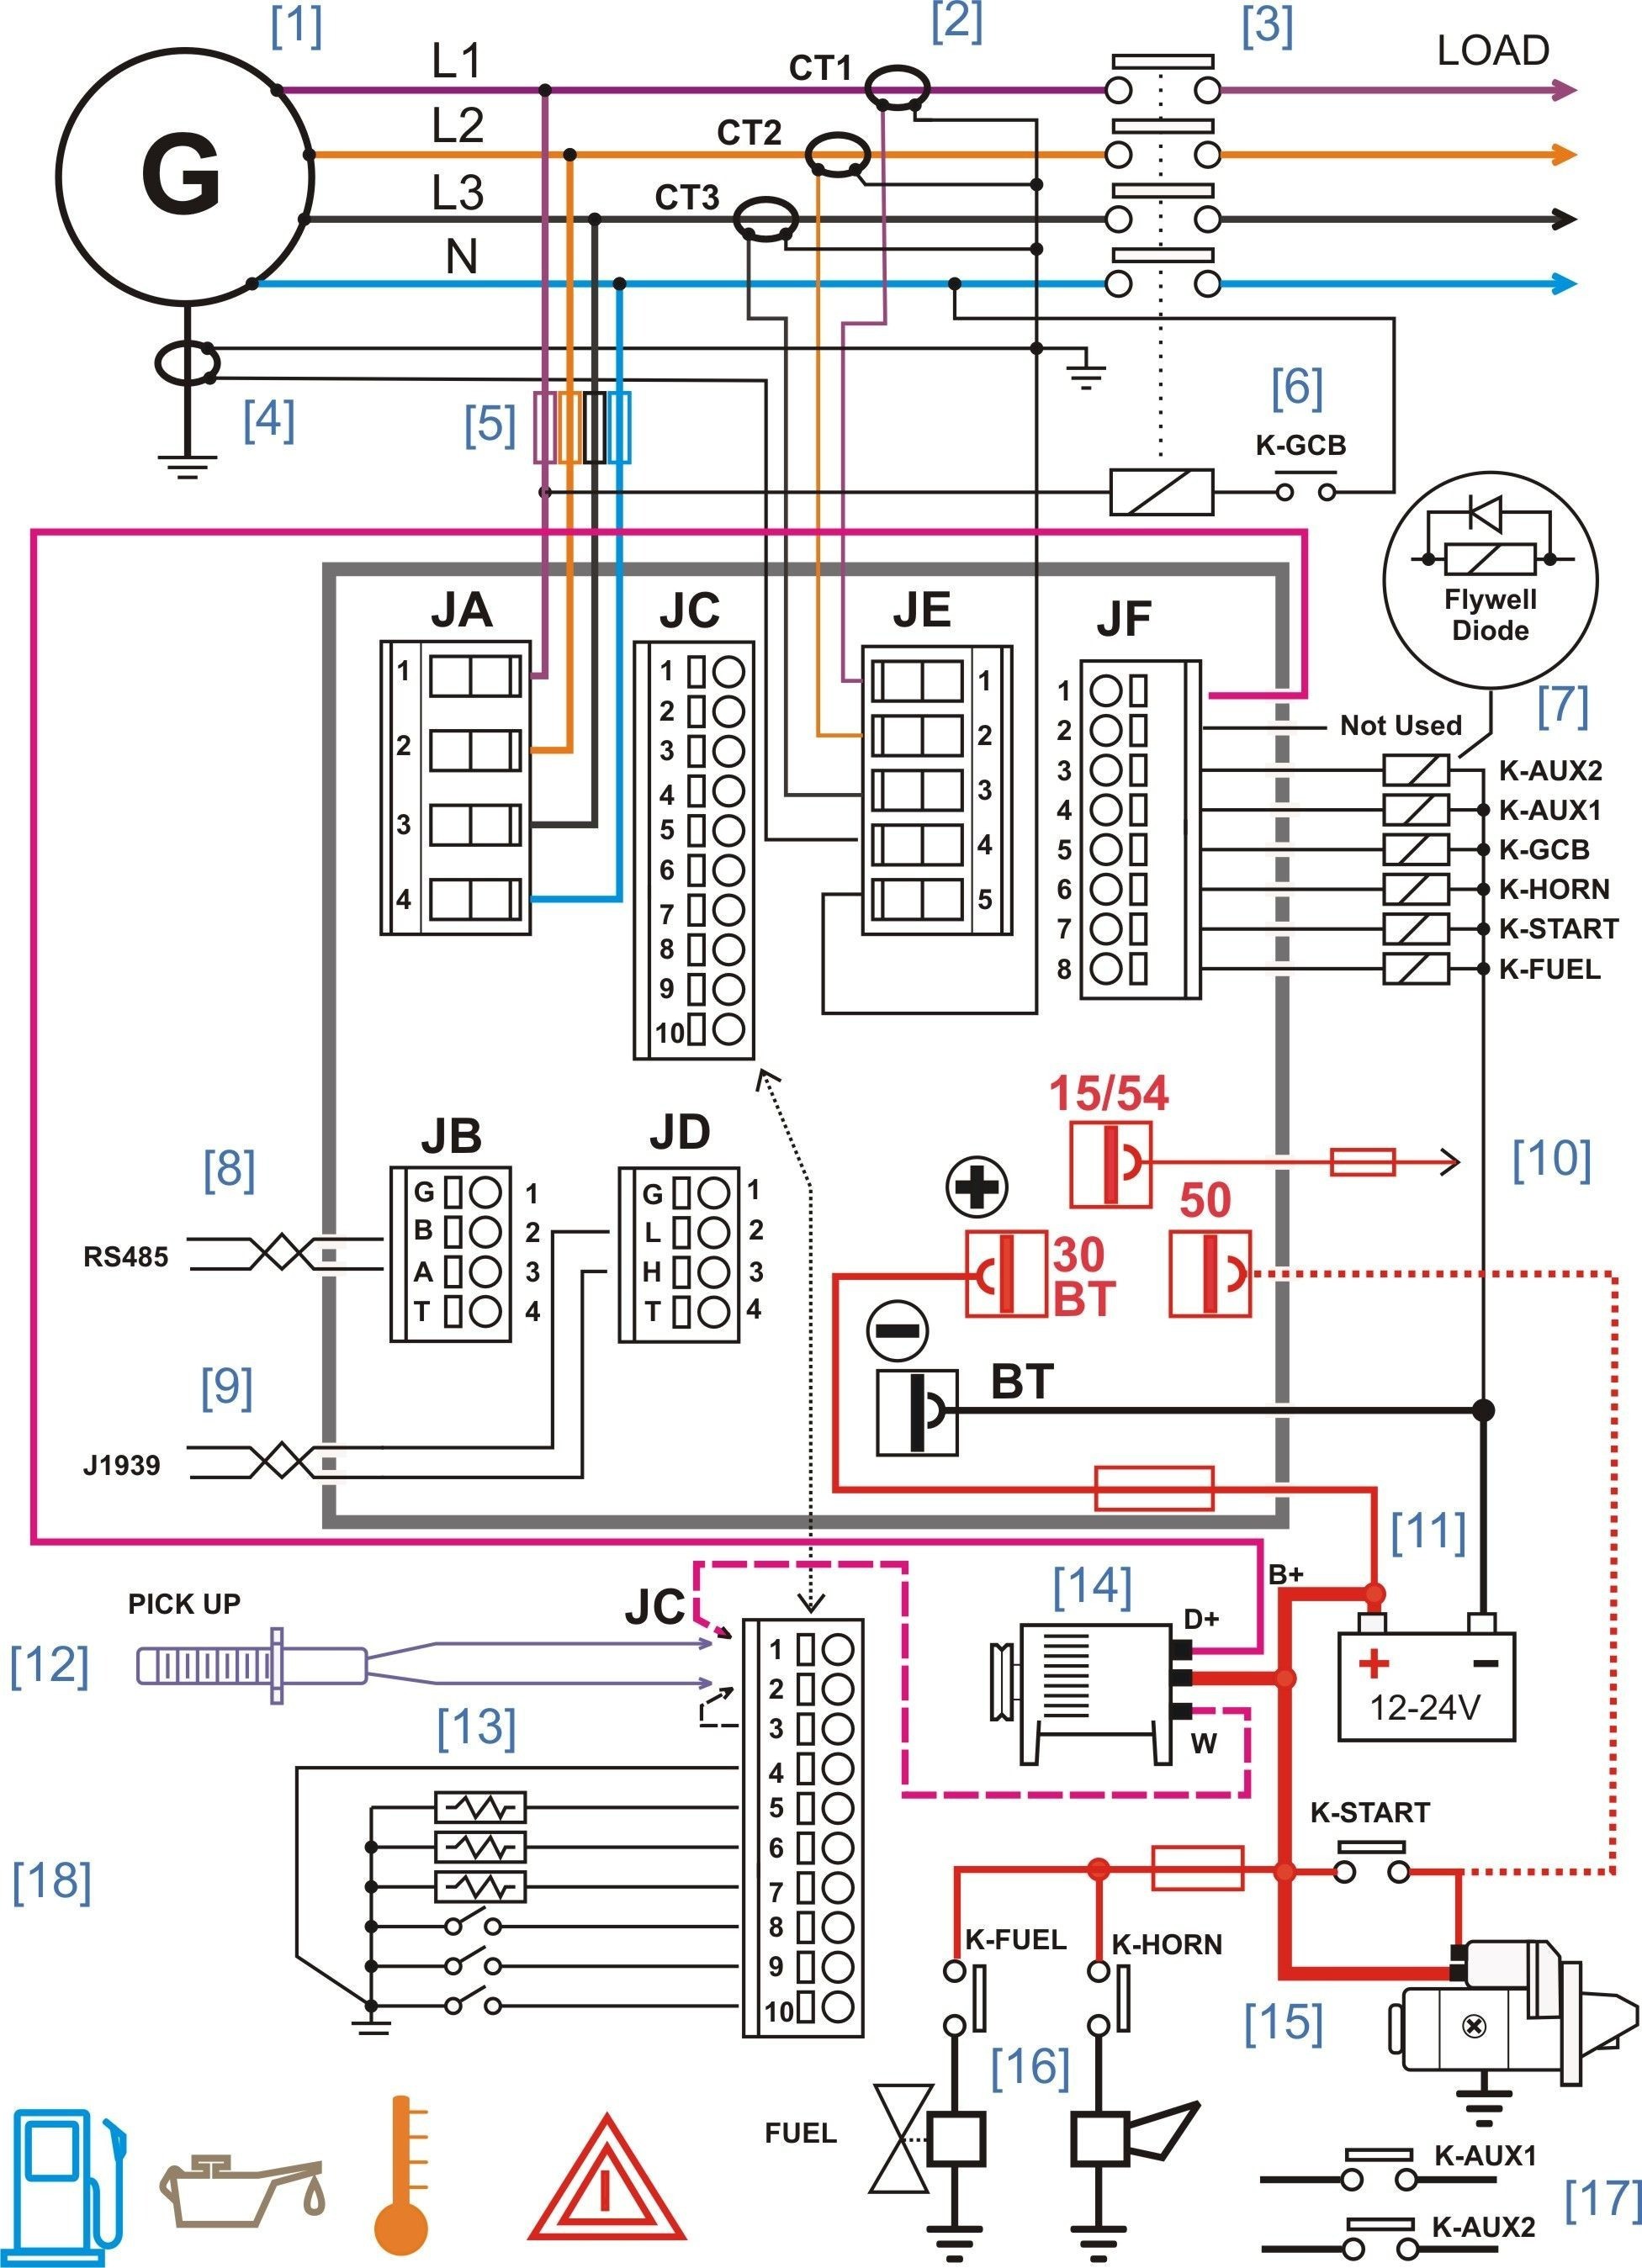 Electrical Wiring Diagram software for Mac Refrence Electrical Circuit Diagram software originalstylophone